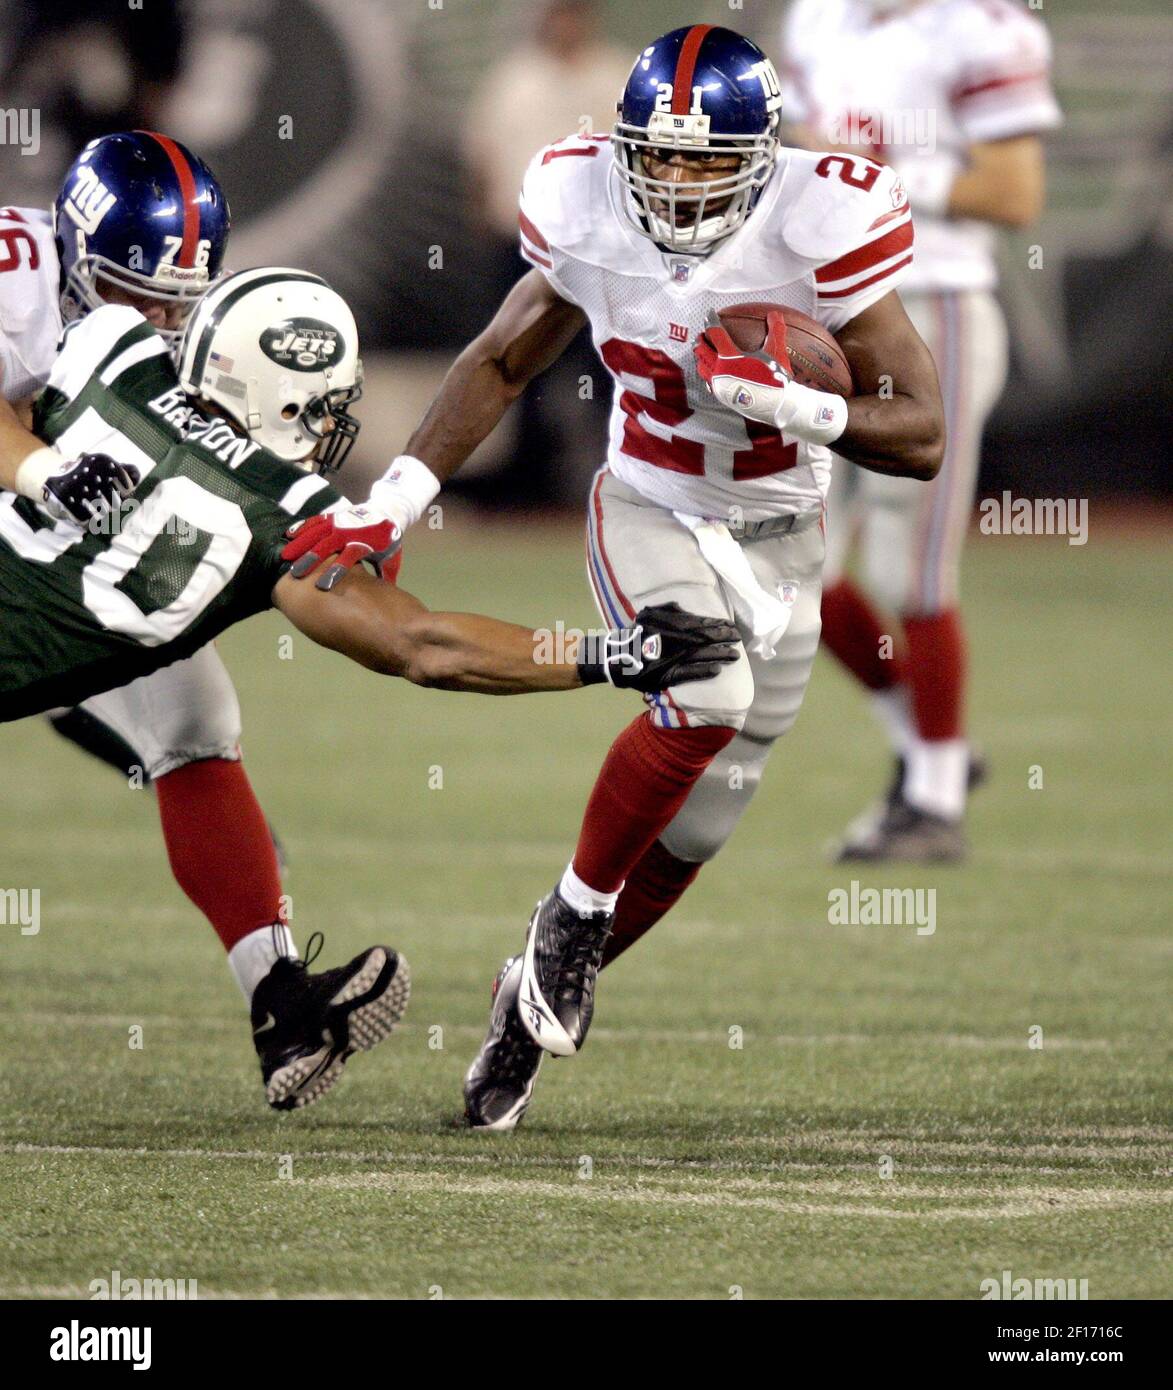 New York Giants' Tiki Barber breaks a tackle attempt by New York Jets' Eric  Barton in the first quarter during NFL football action at Giants Stadium in  East Rutherford, New Jersey, Friday,